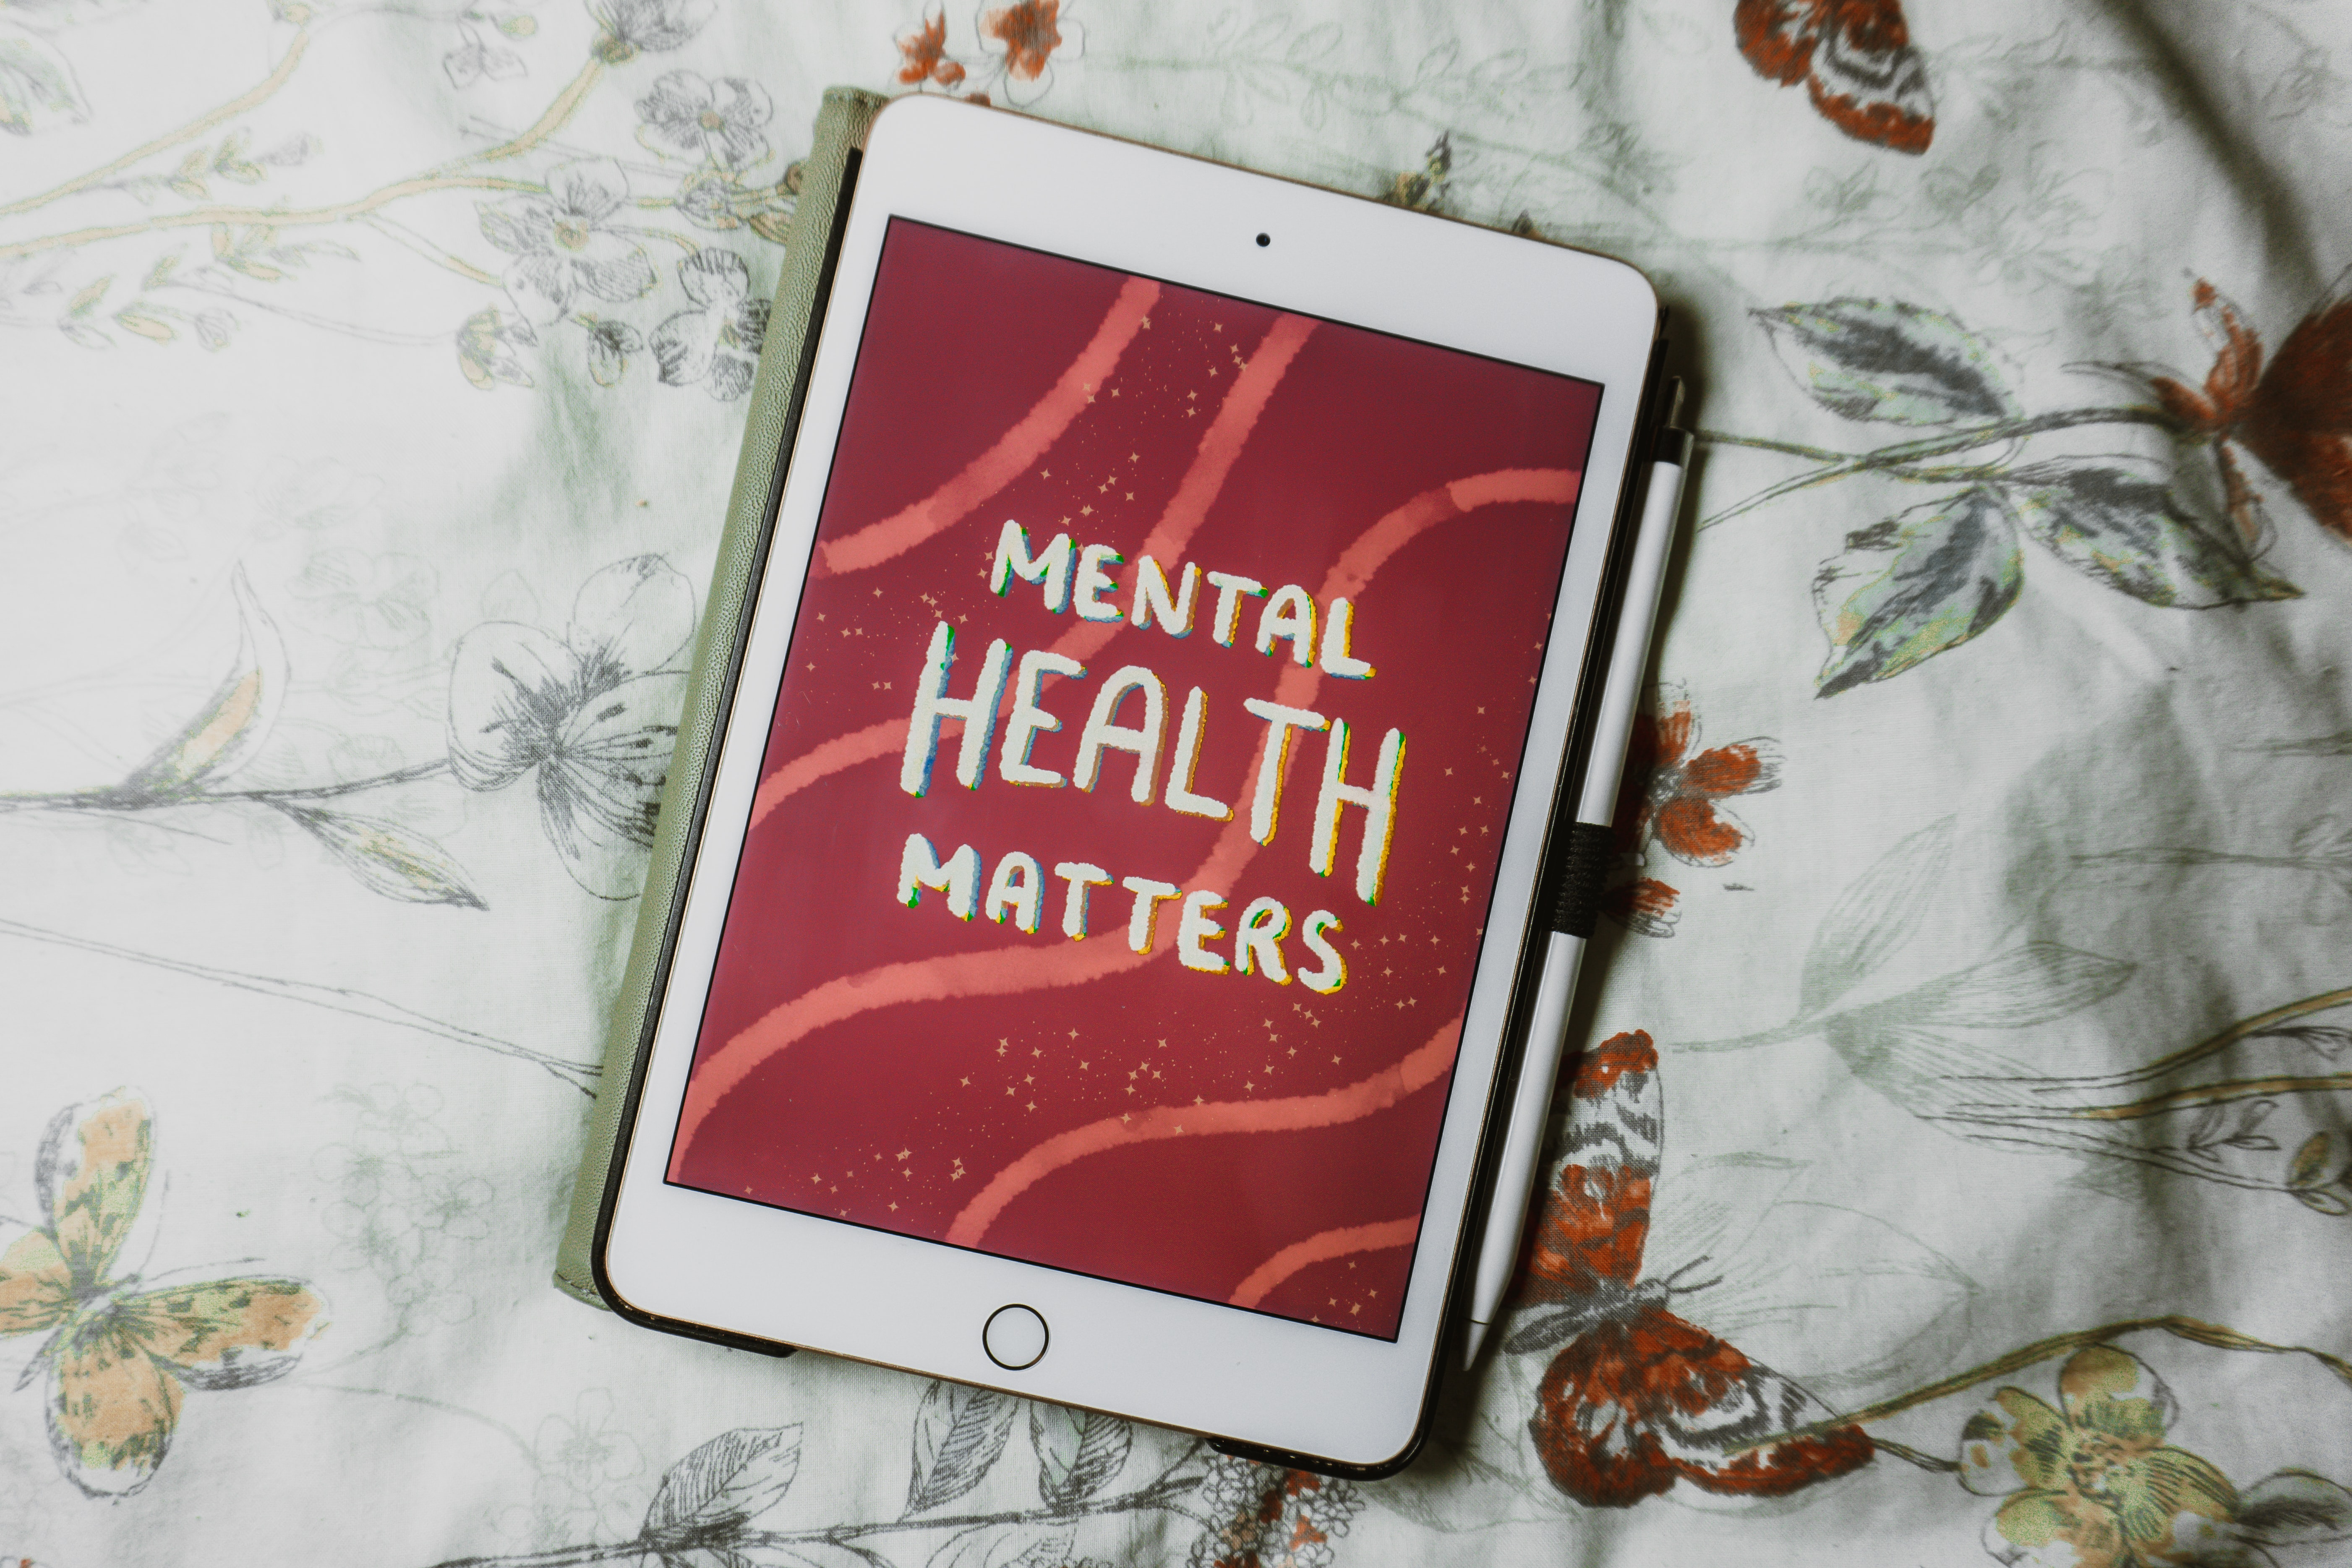 Mental health matters reminder on iPhone